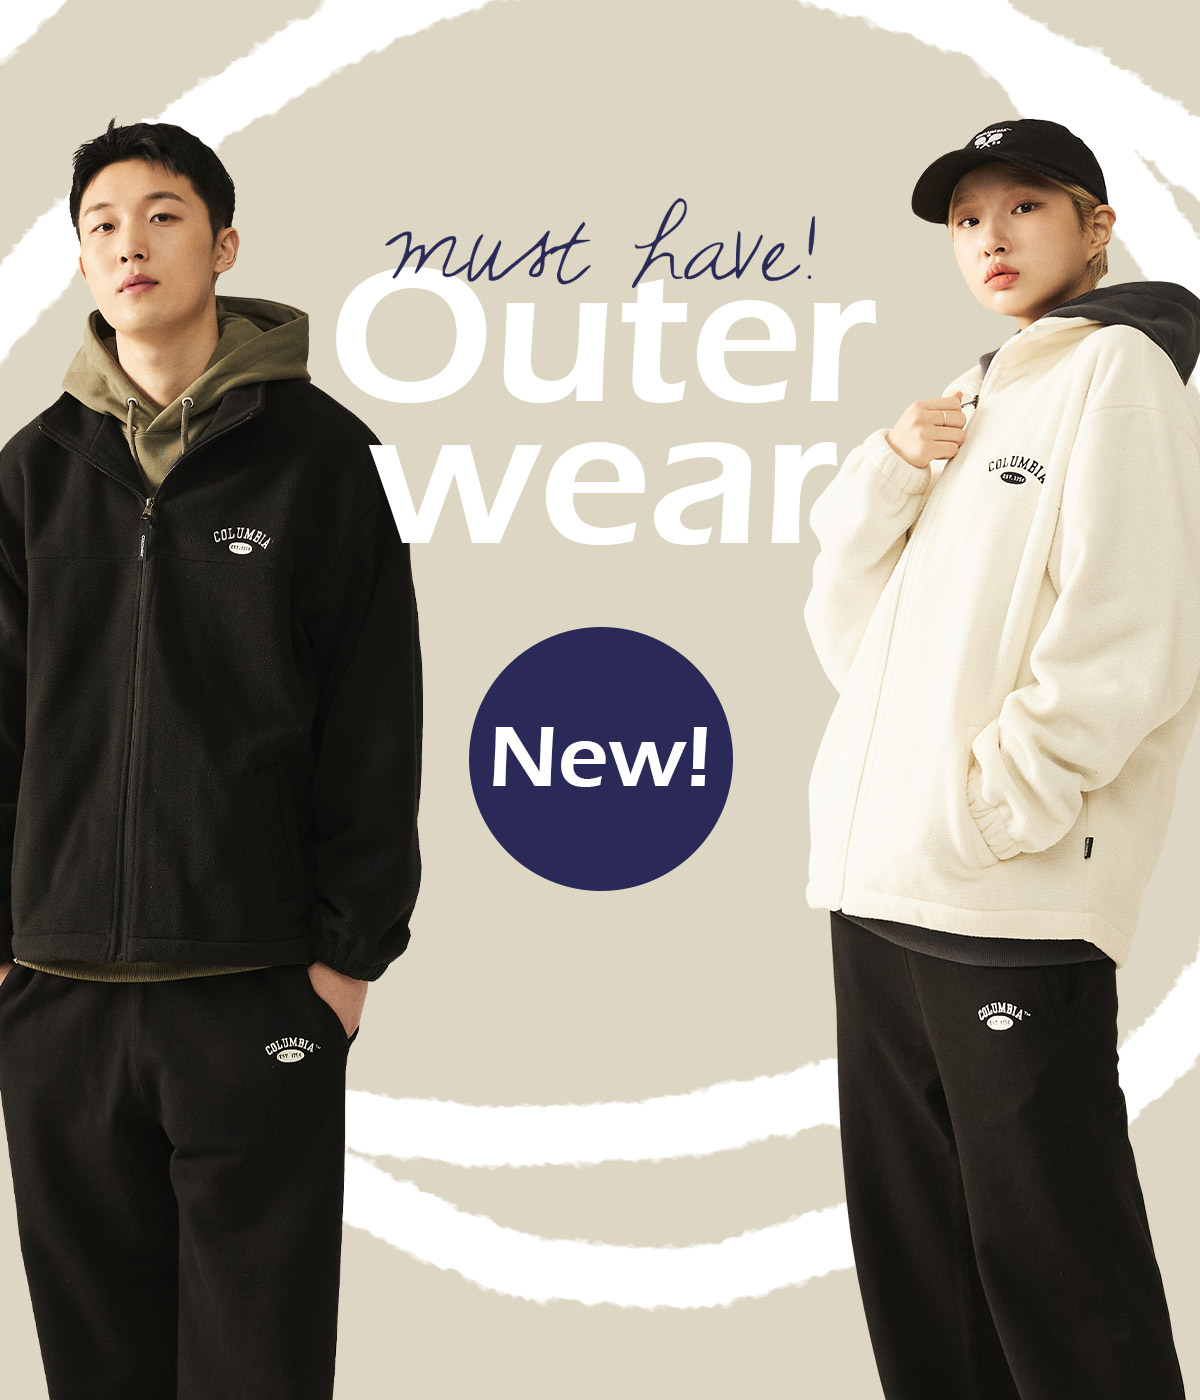 Outer wear!